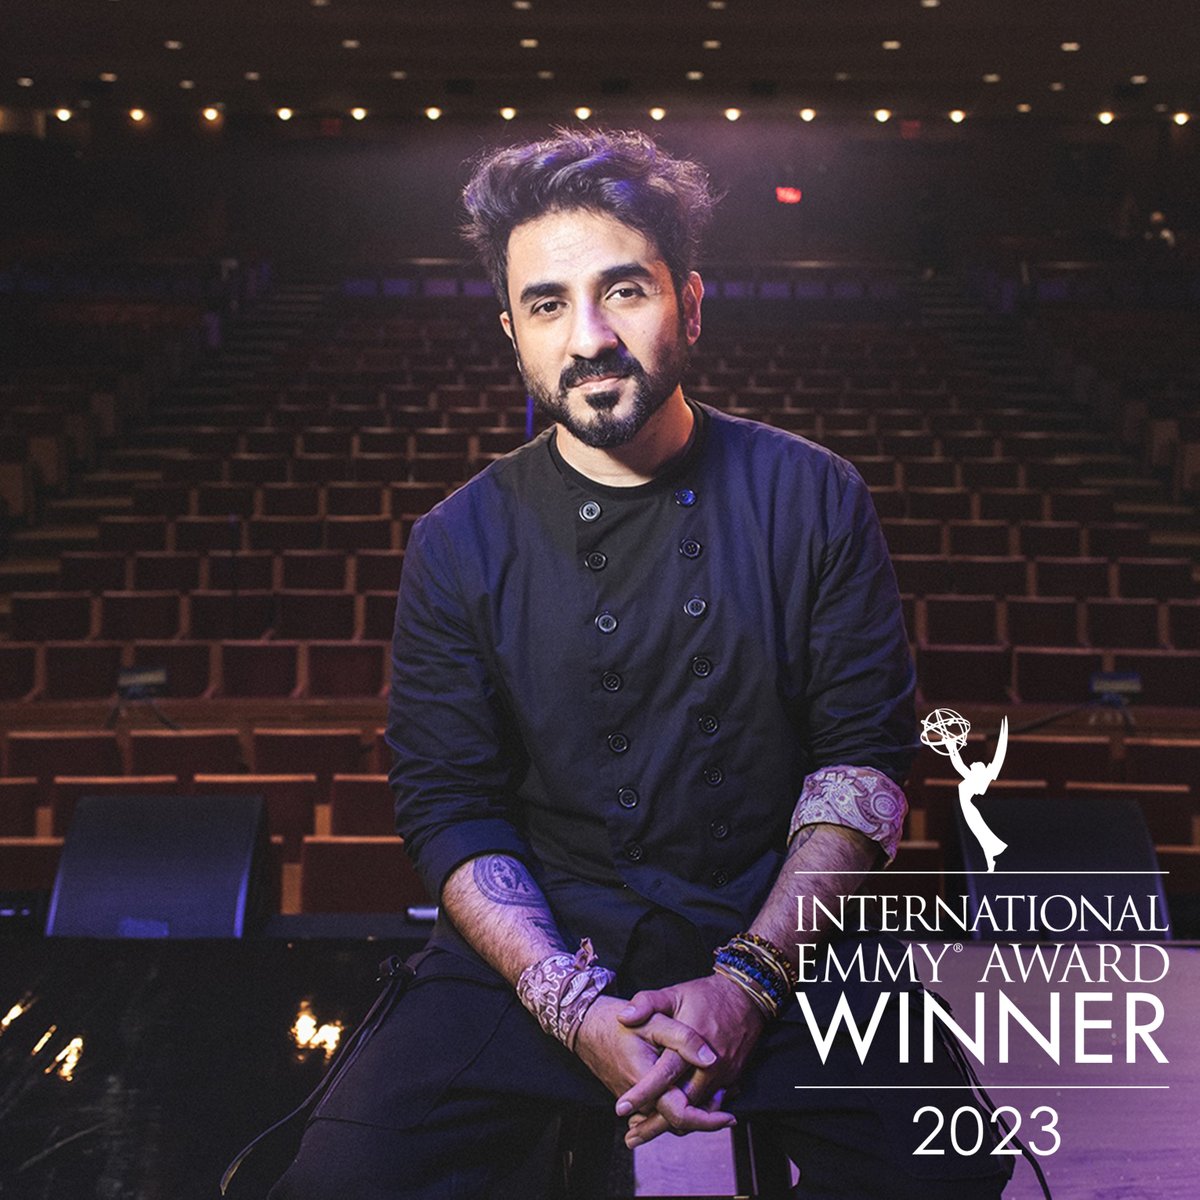 We have a Tie! The International Emmy for Comedy goes to 'Vir Das: Landing” produced by Weirdass Comedy / Rotten Science / Netflix #iemmyWIN